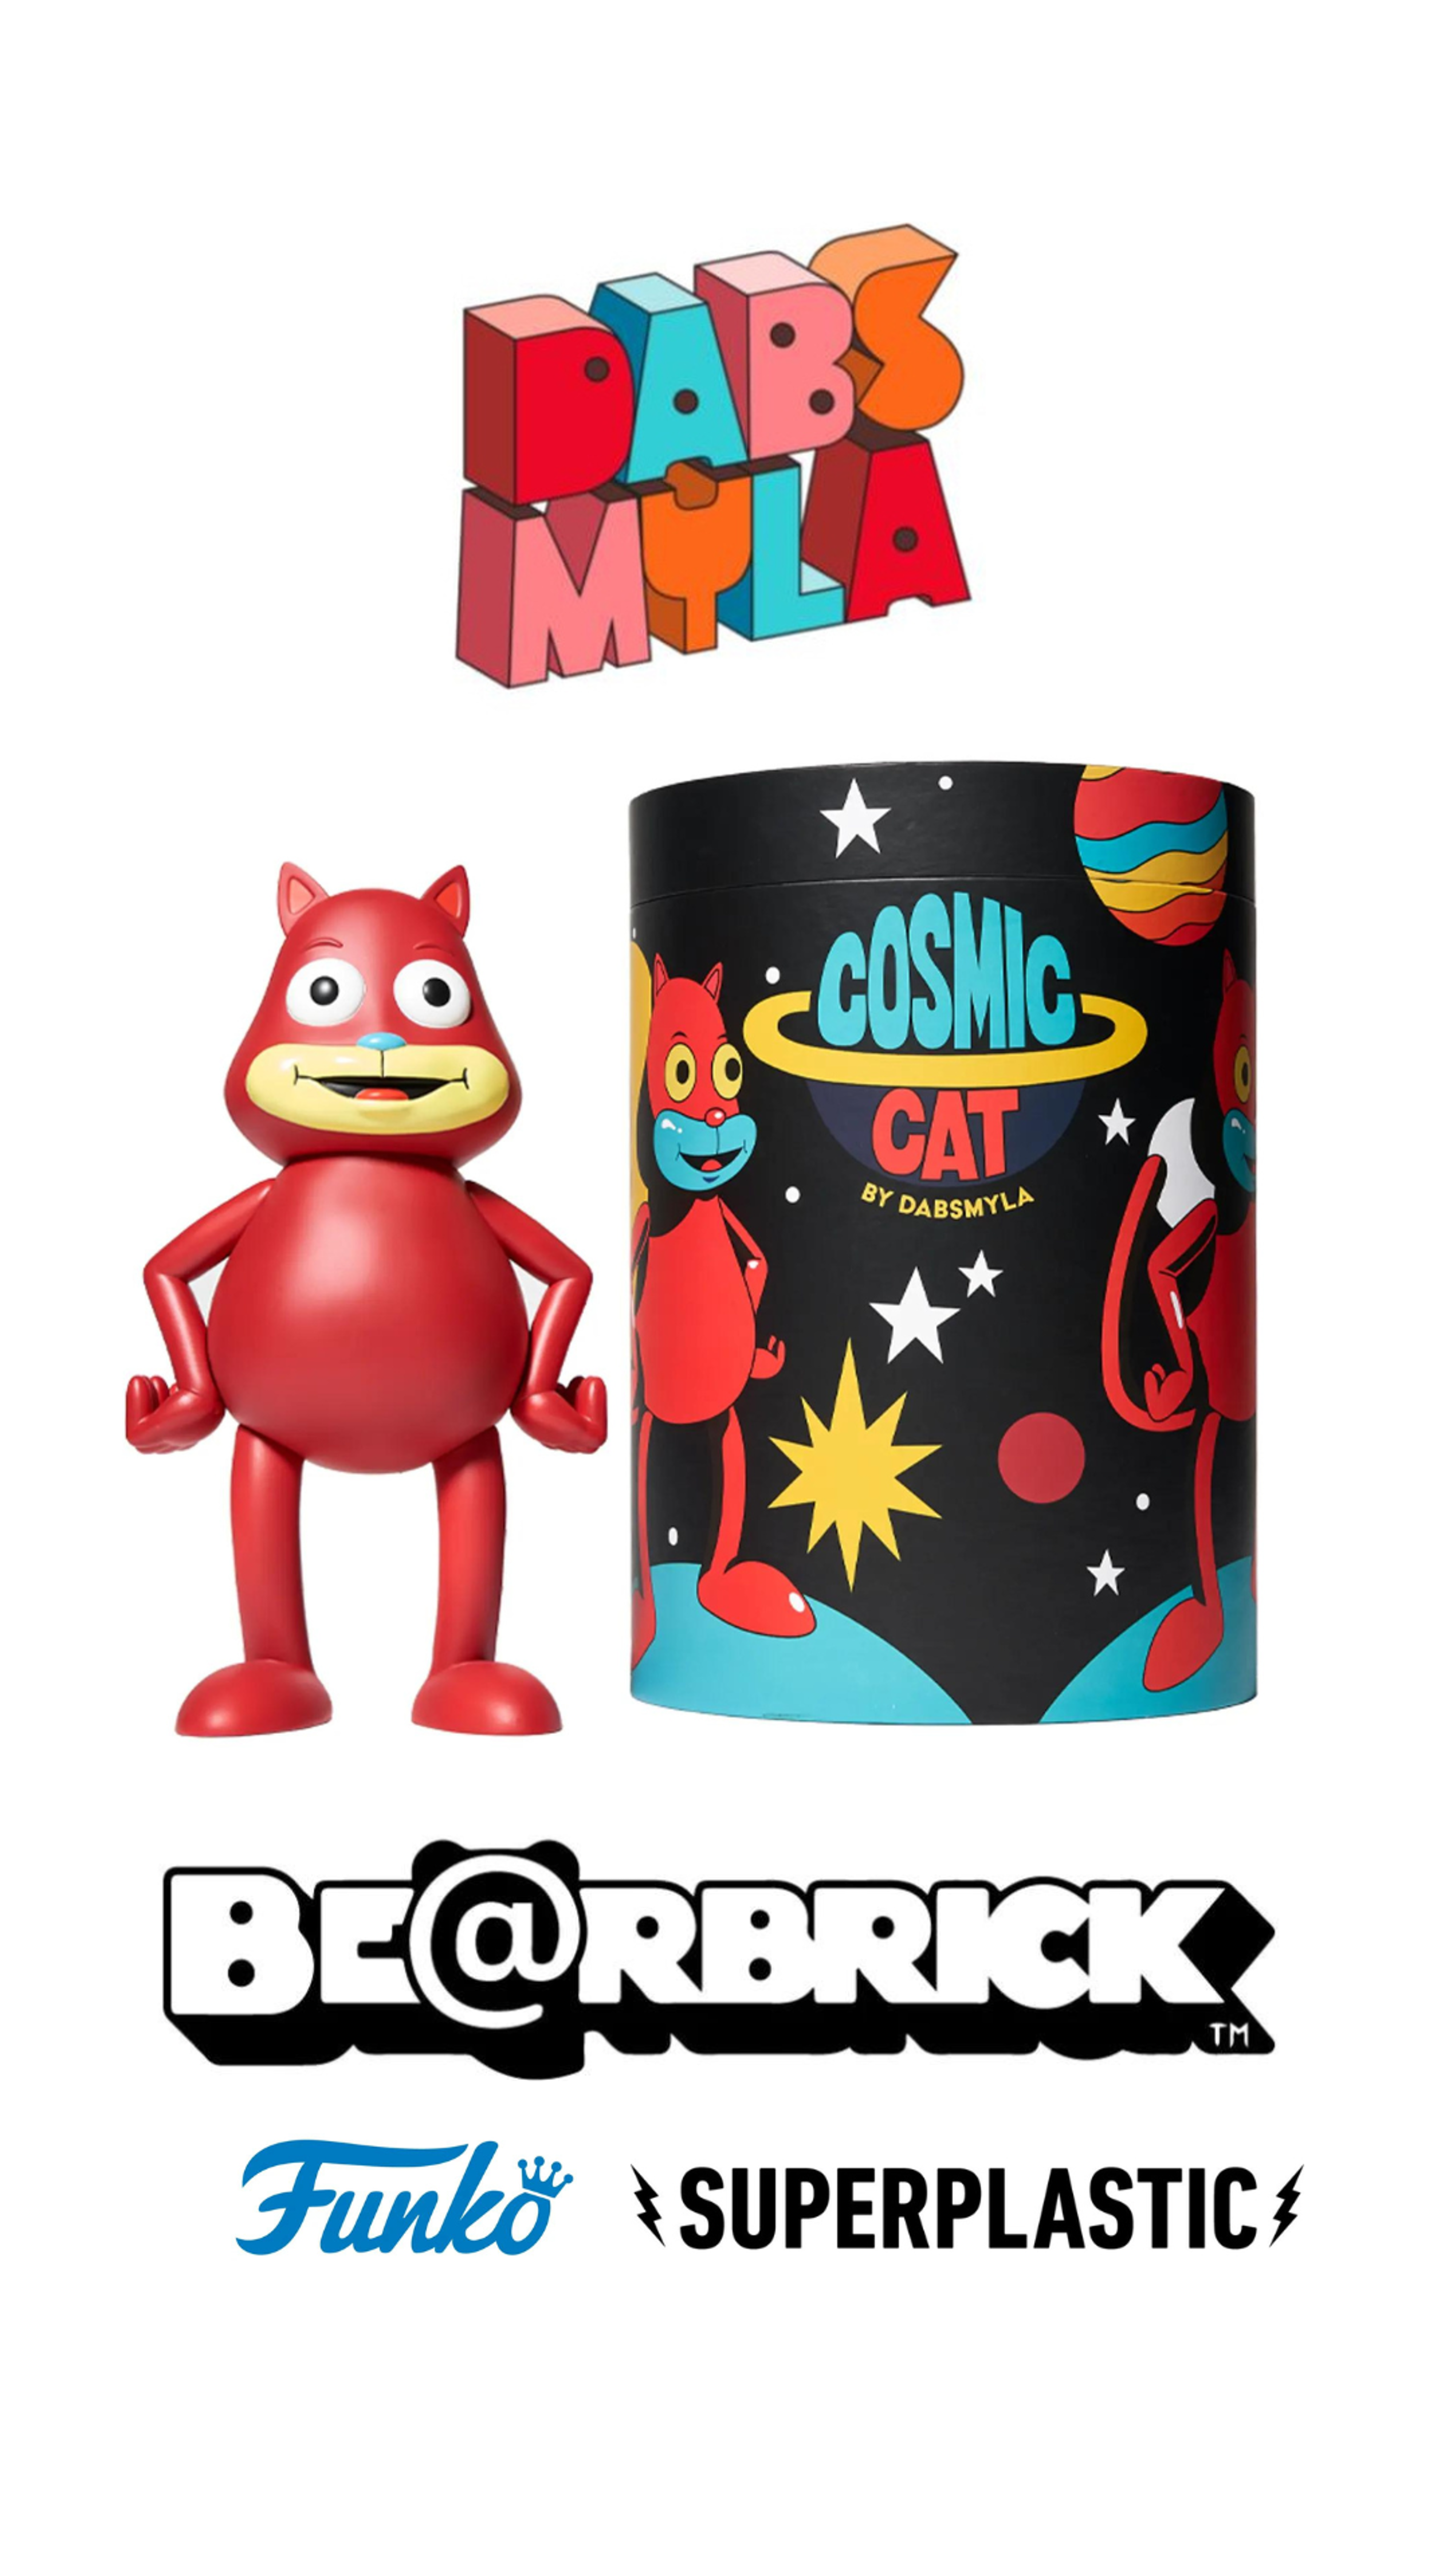 Preview image for the show titled "Designer Toys 20 Gumball Game Cosmic Cat + Bearbricks & More" at April 18, 2024